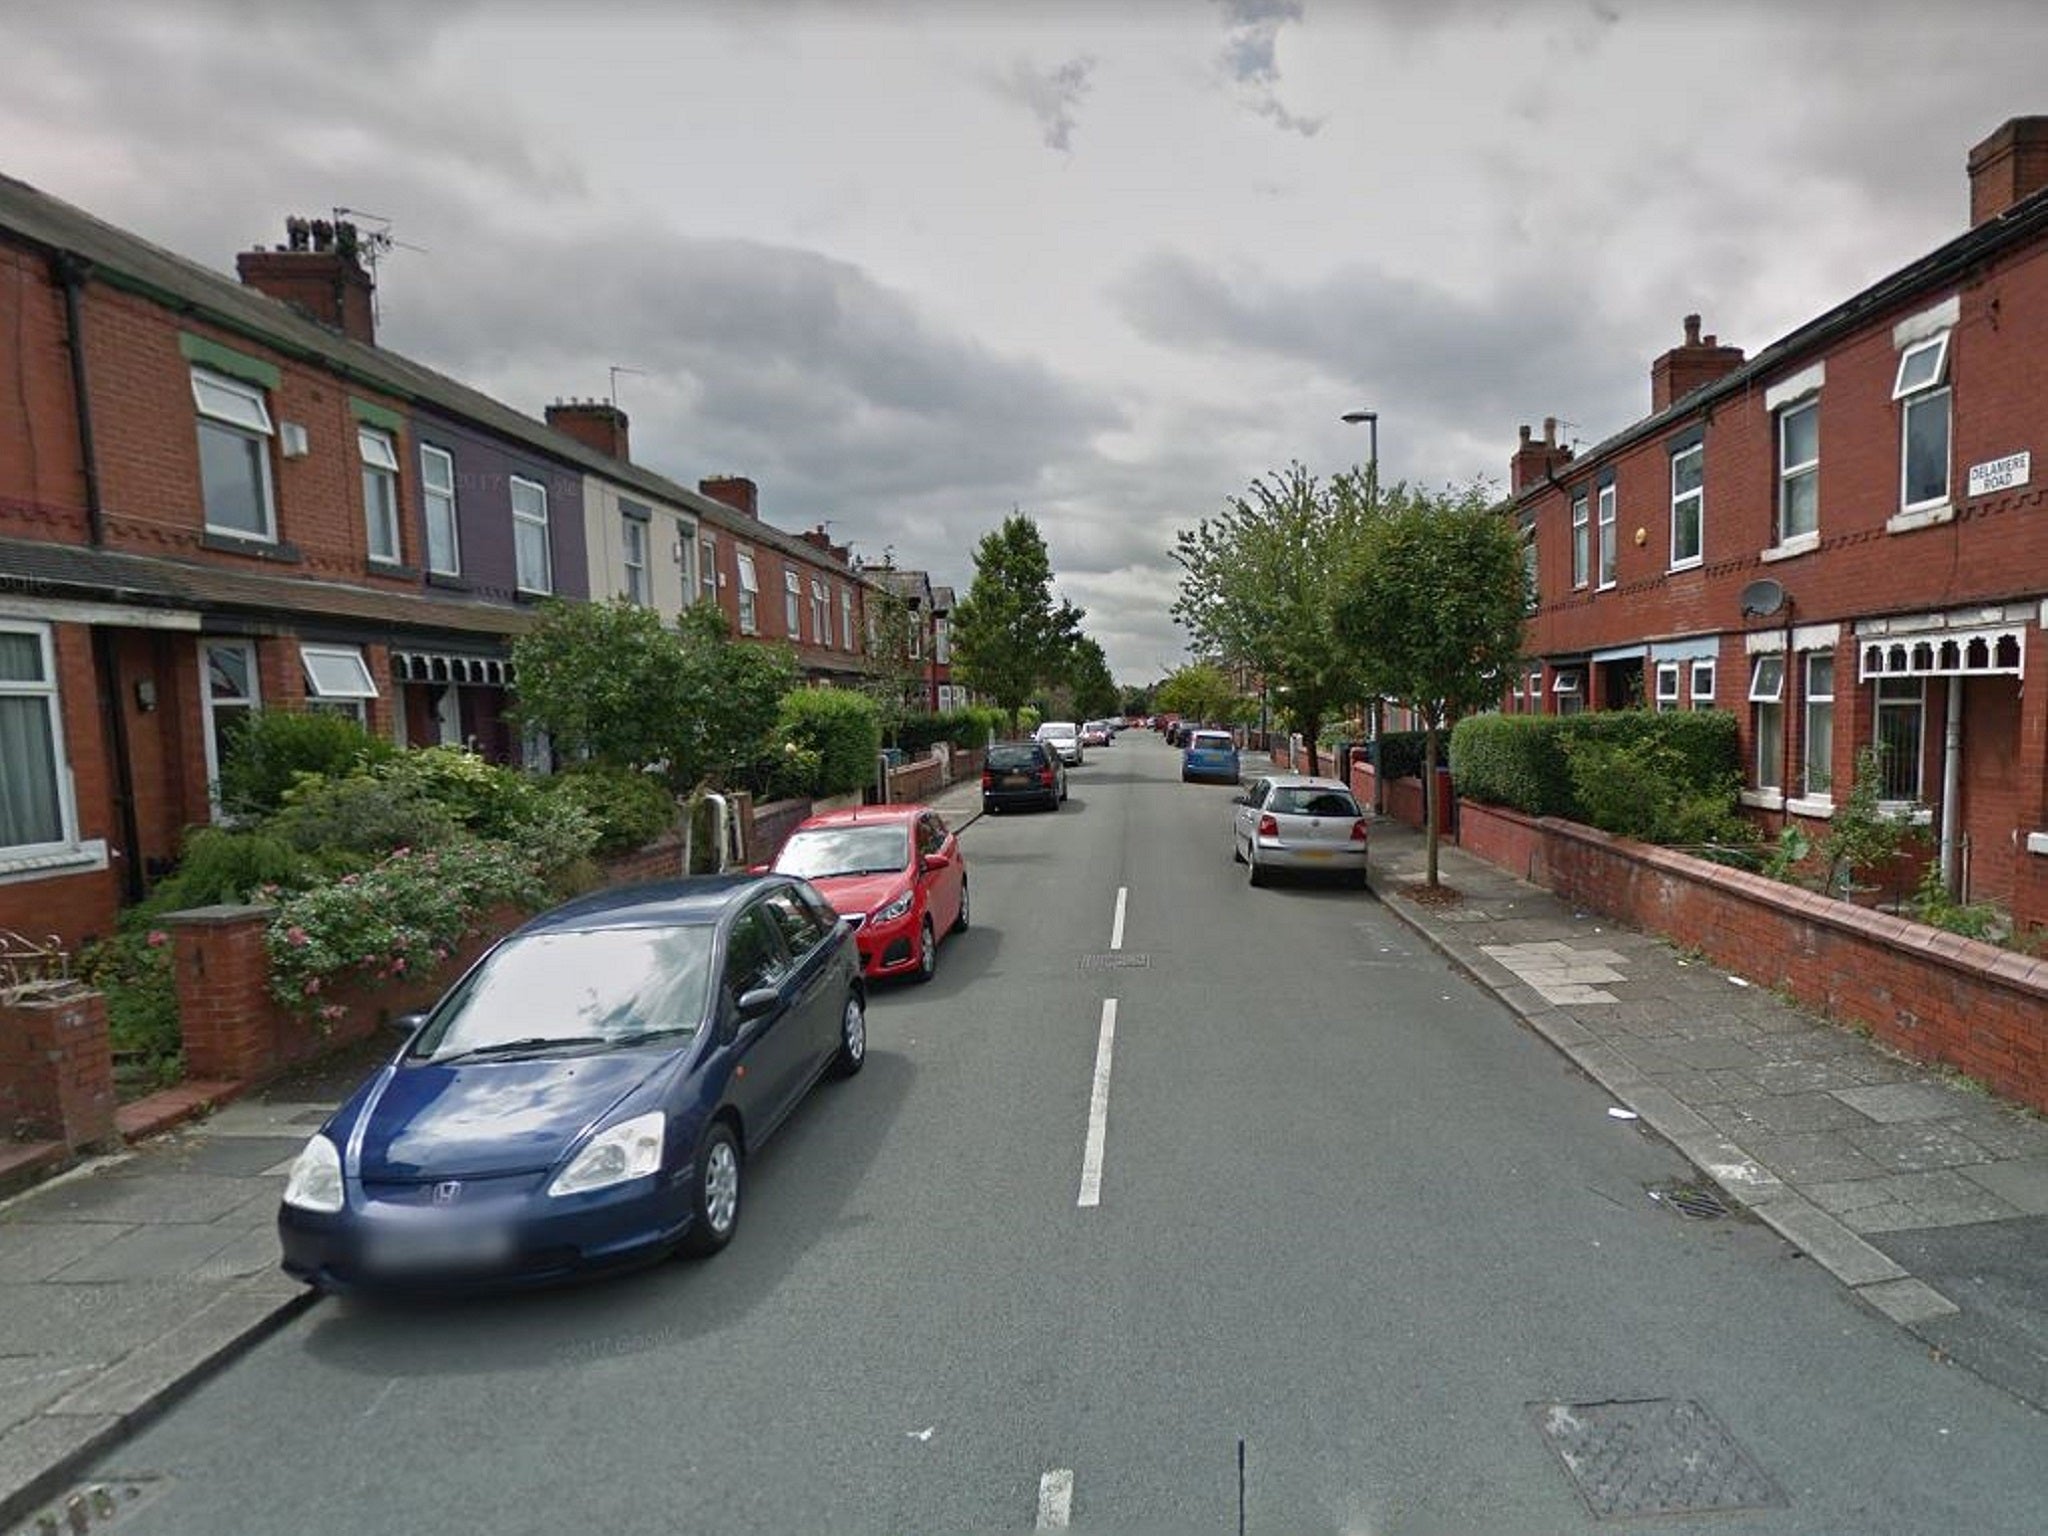 Police were attacked attempting to shut down an Airbnb house party in Delamere Road, Levenshulme, Manchester.